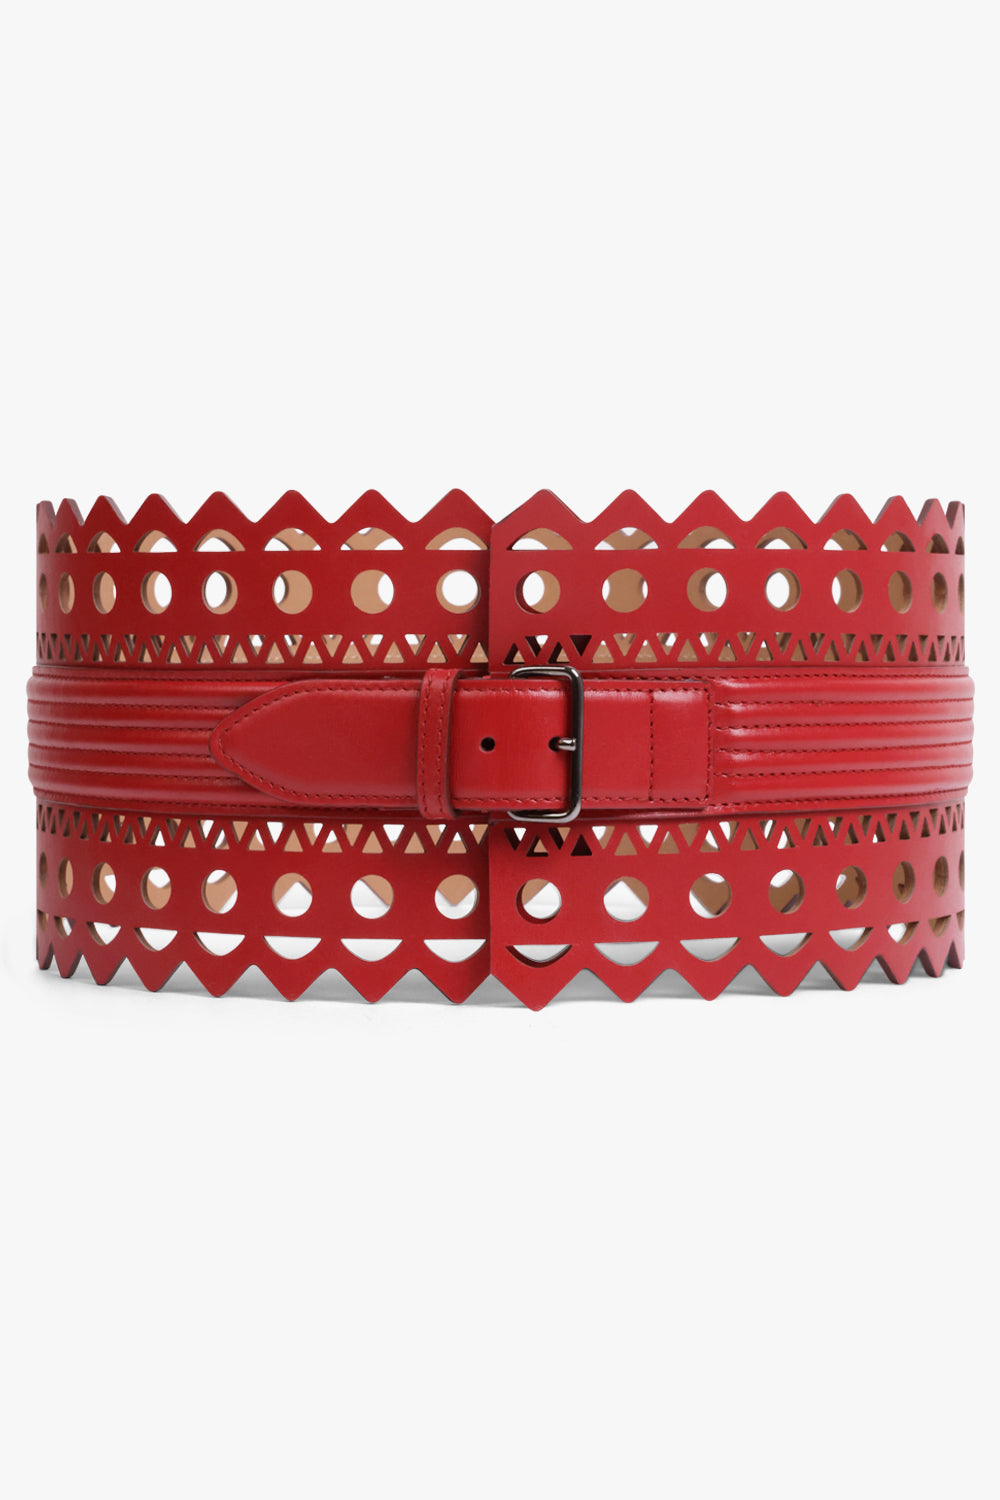 ALAIA ACCESSORIES 1992 LEATHER CORSET BELT |  RED